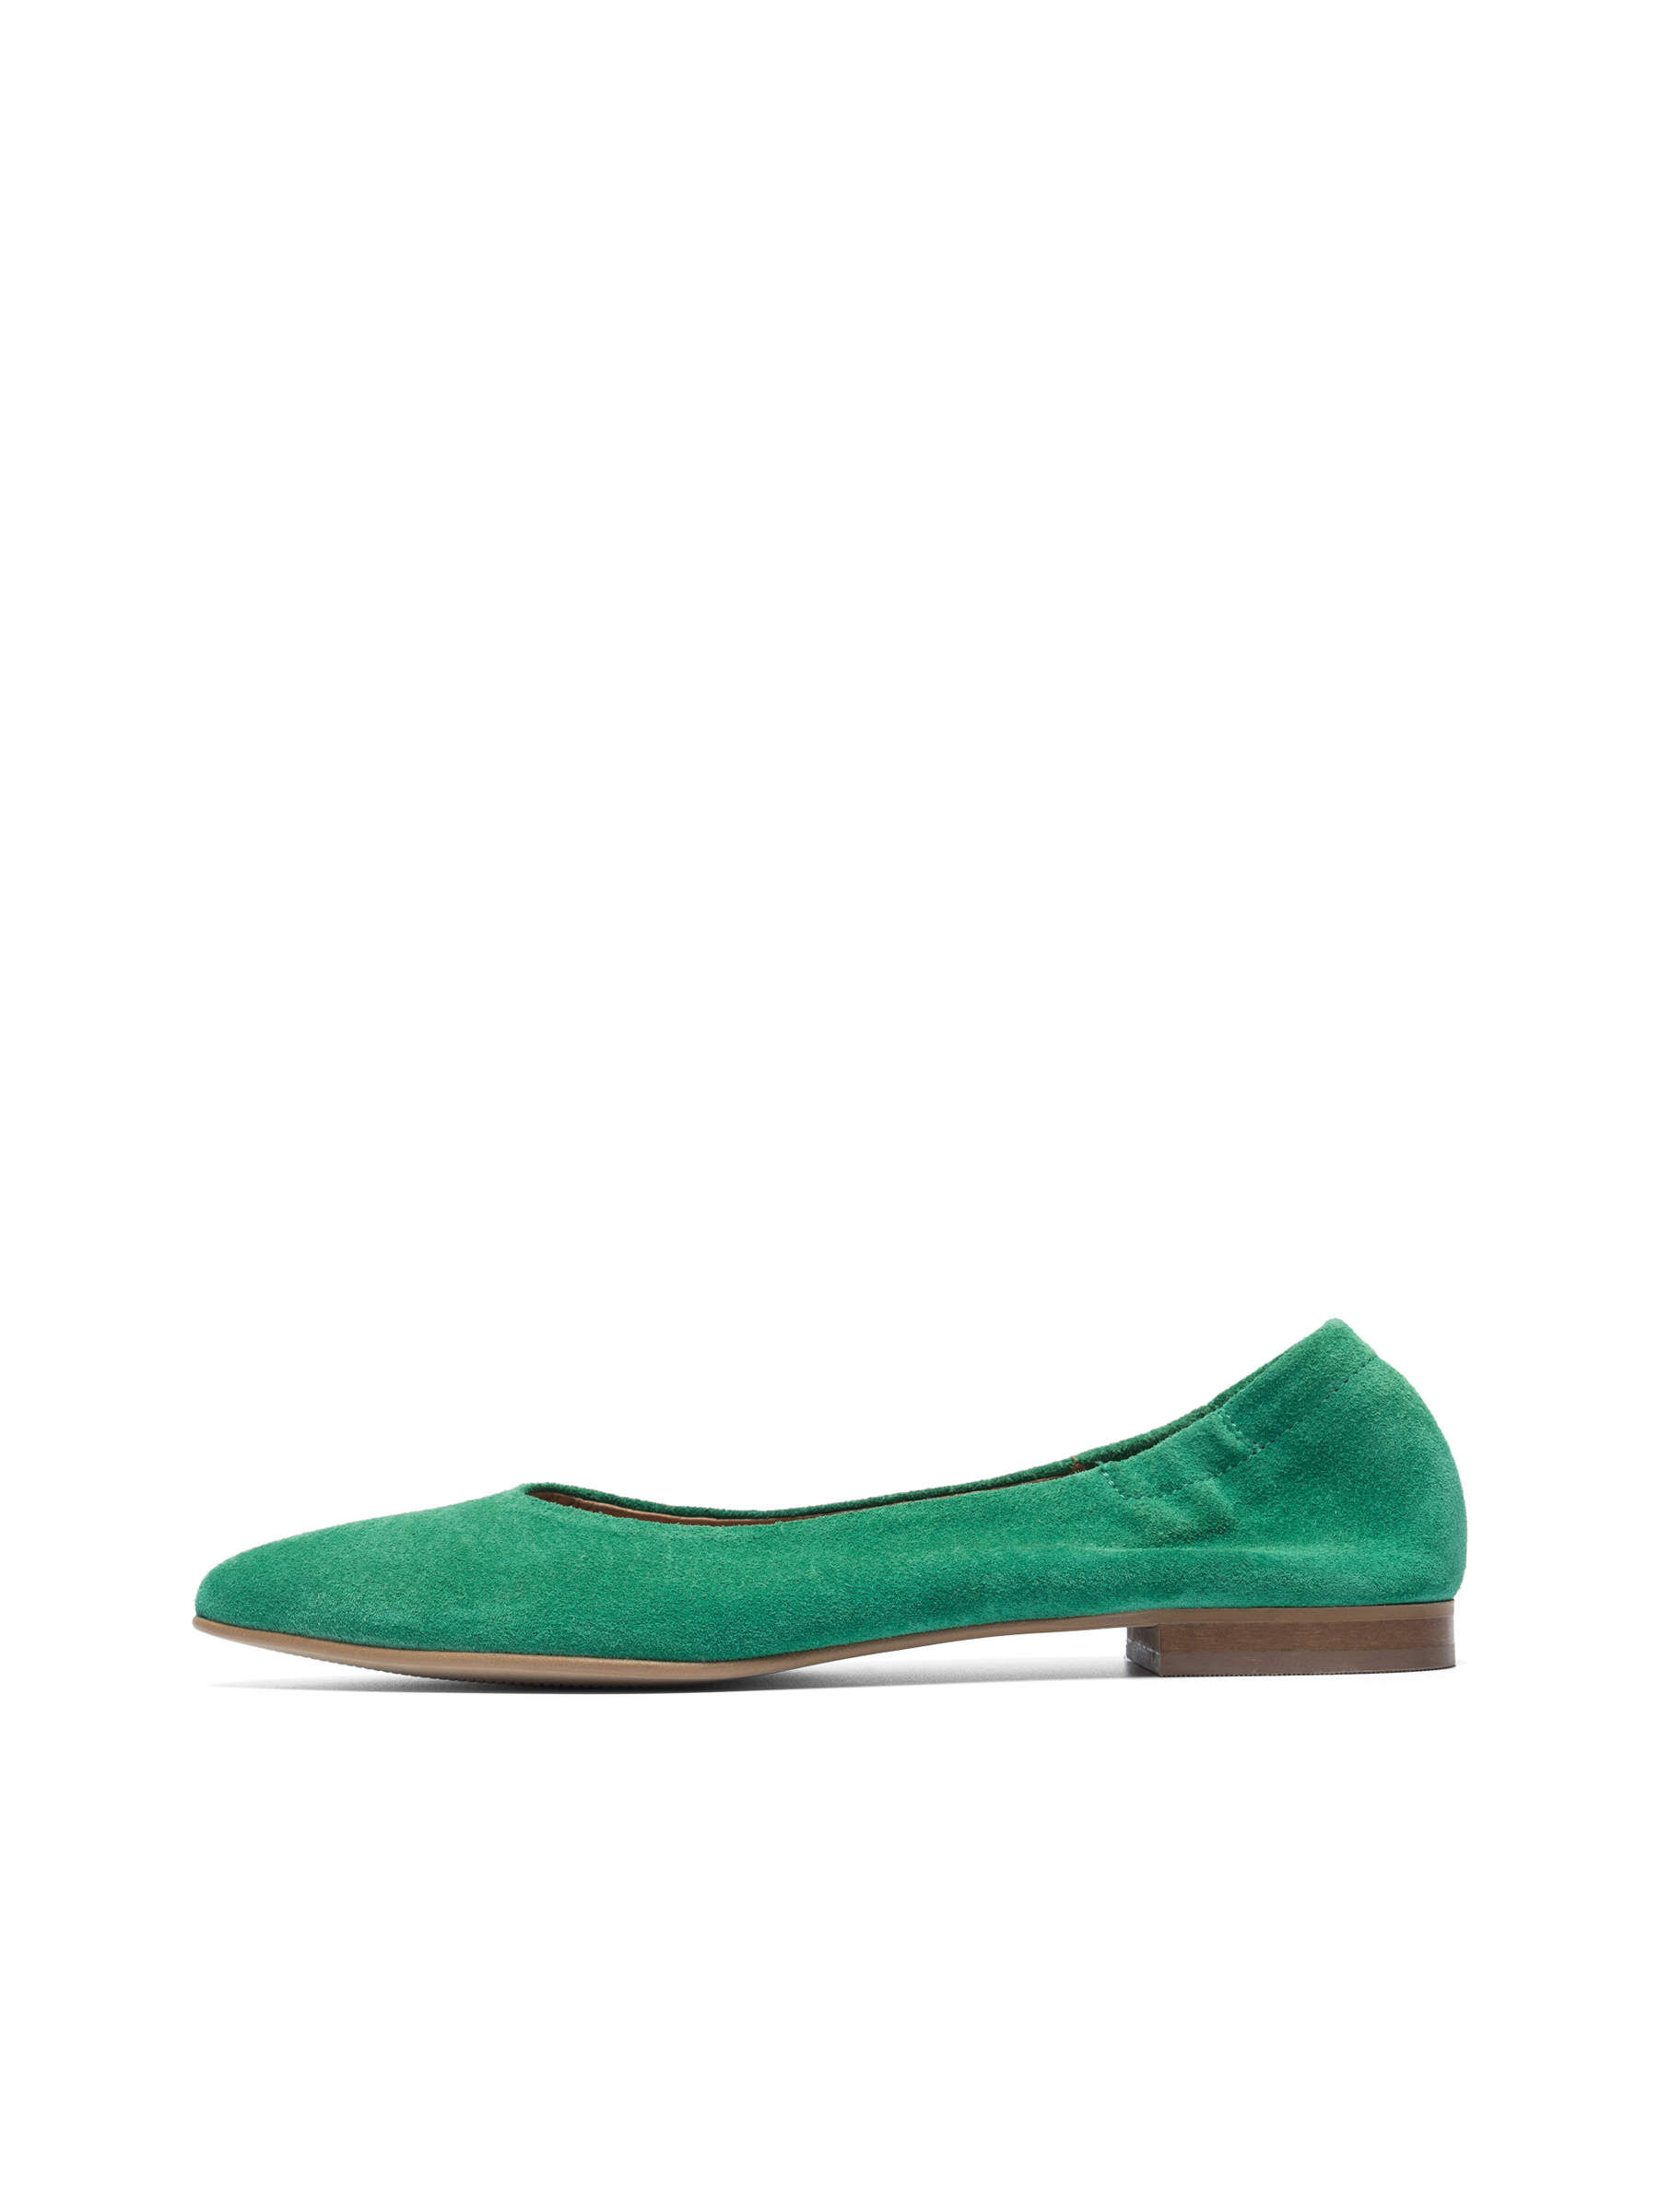 ASOS DESIGN Money chunky lace up flat shoes in forest green croc | ASOS